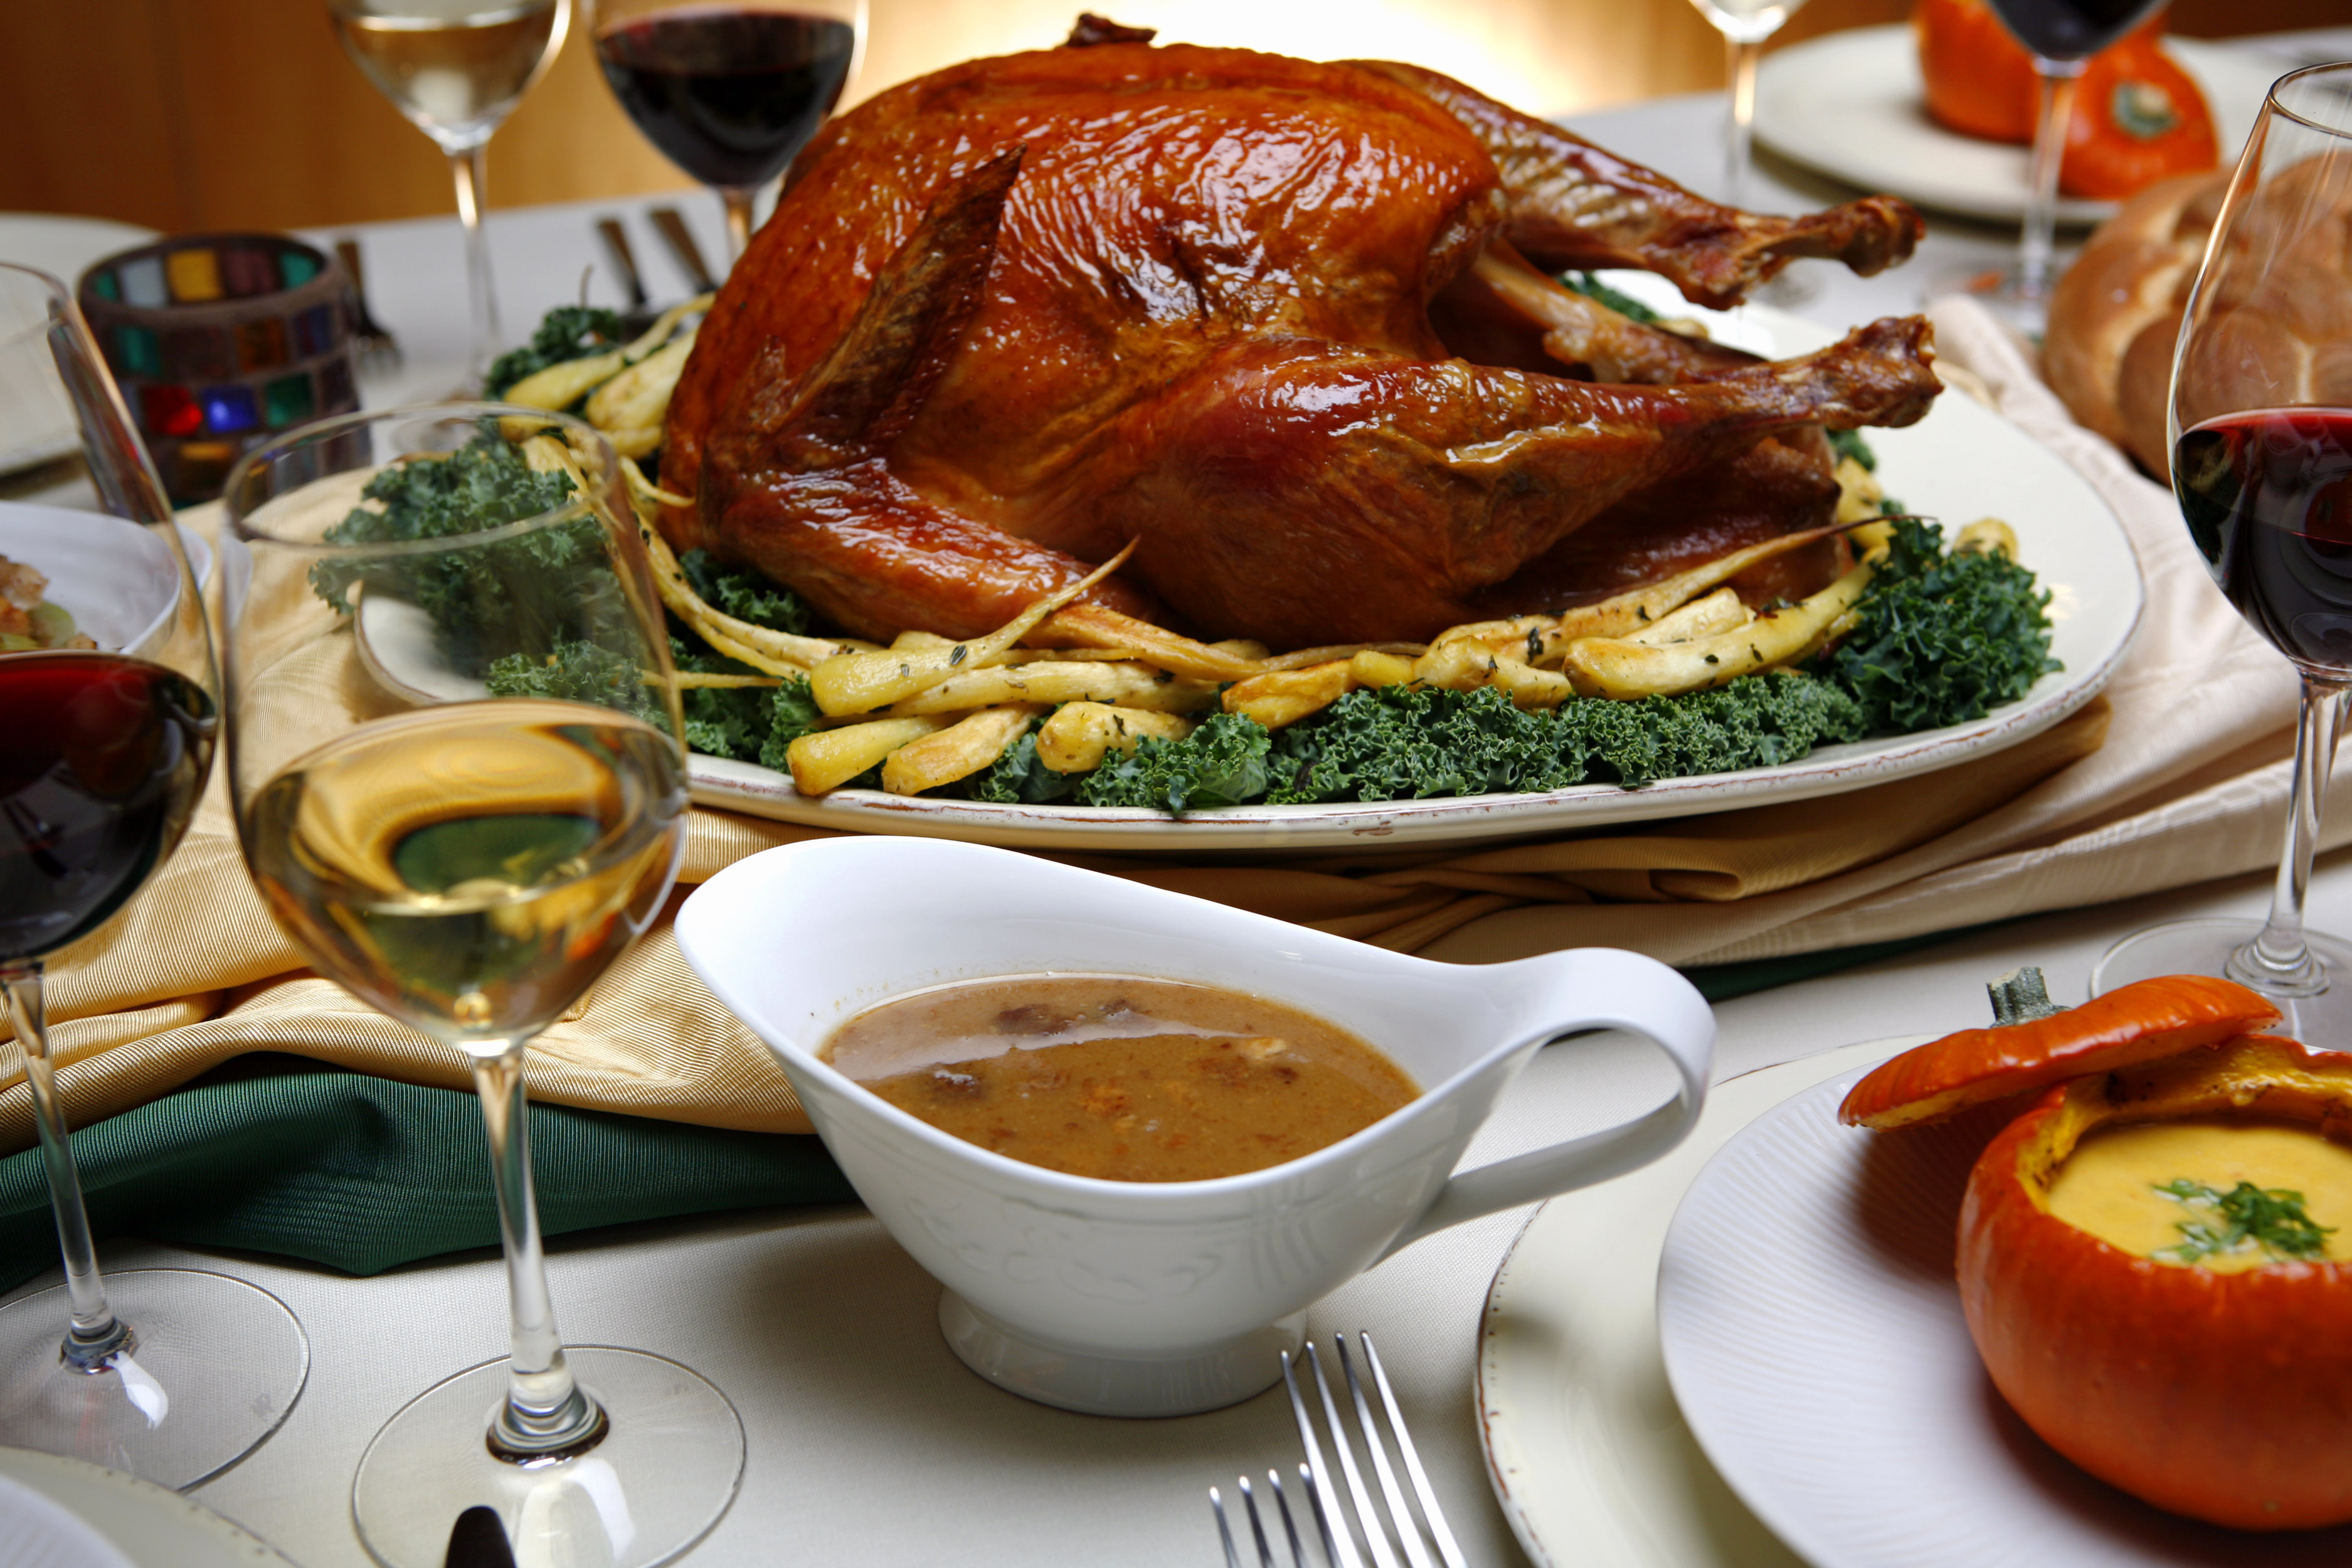 Top 10 Thanksgiving Foods That Will Be On Every Table This Year - SideChef